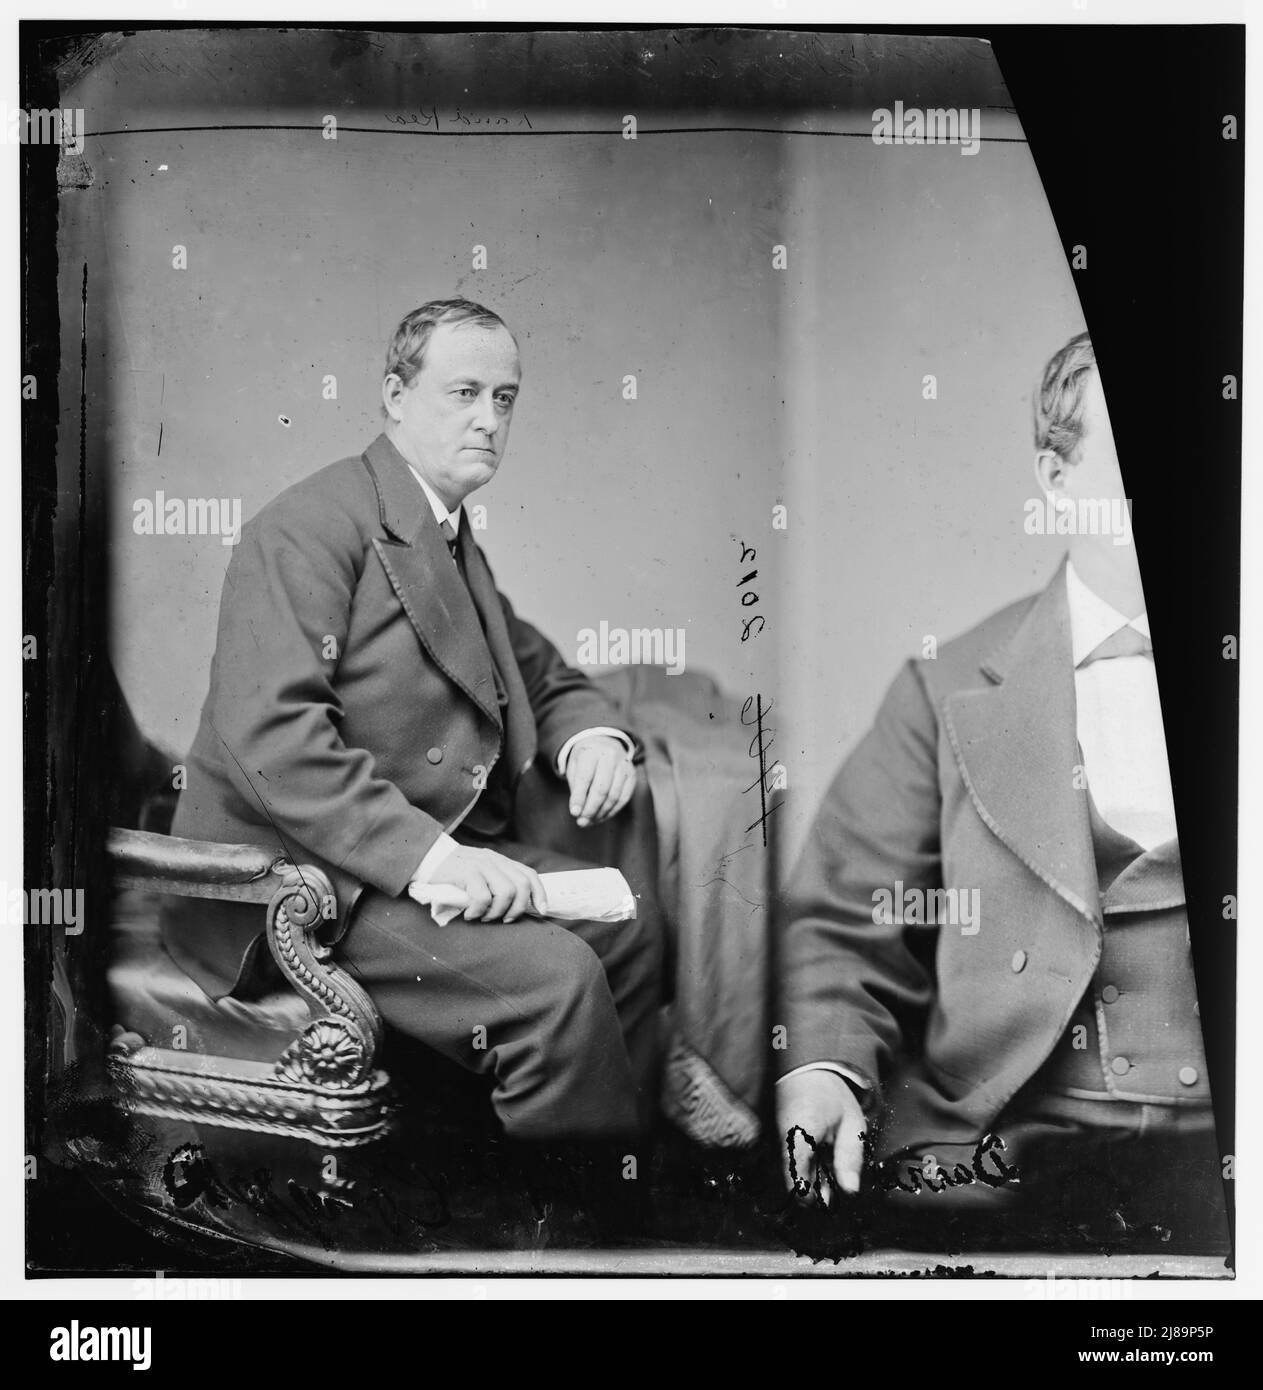 David Rea of Missouri, 1865-1880. Rea, Hon. David, Rep. of MO, Lt. Col. in Federal Army, between 1865 and 1880. [Soldier in the Union Army, lawyer and politician]. Stock Photo